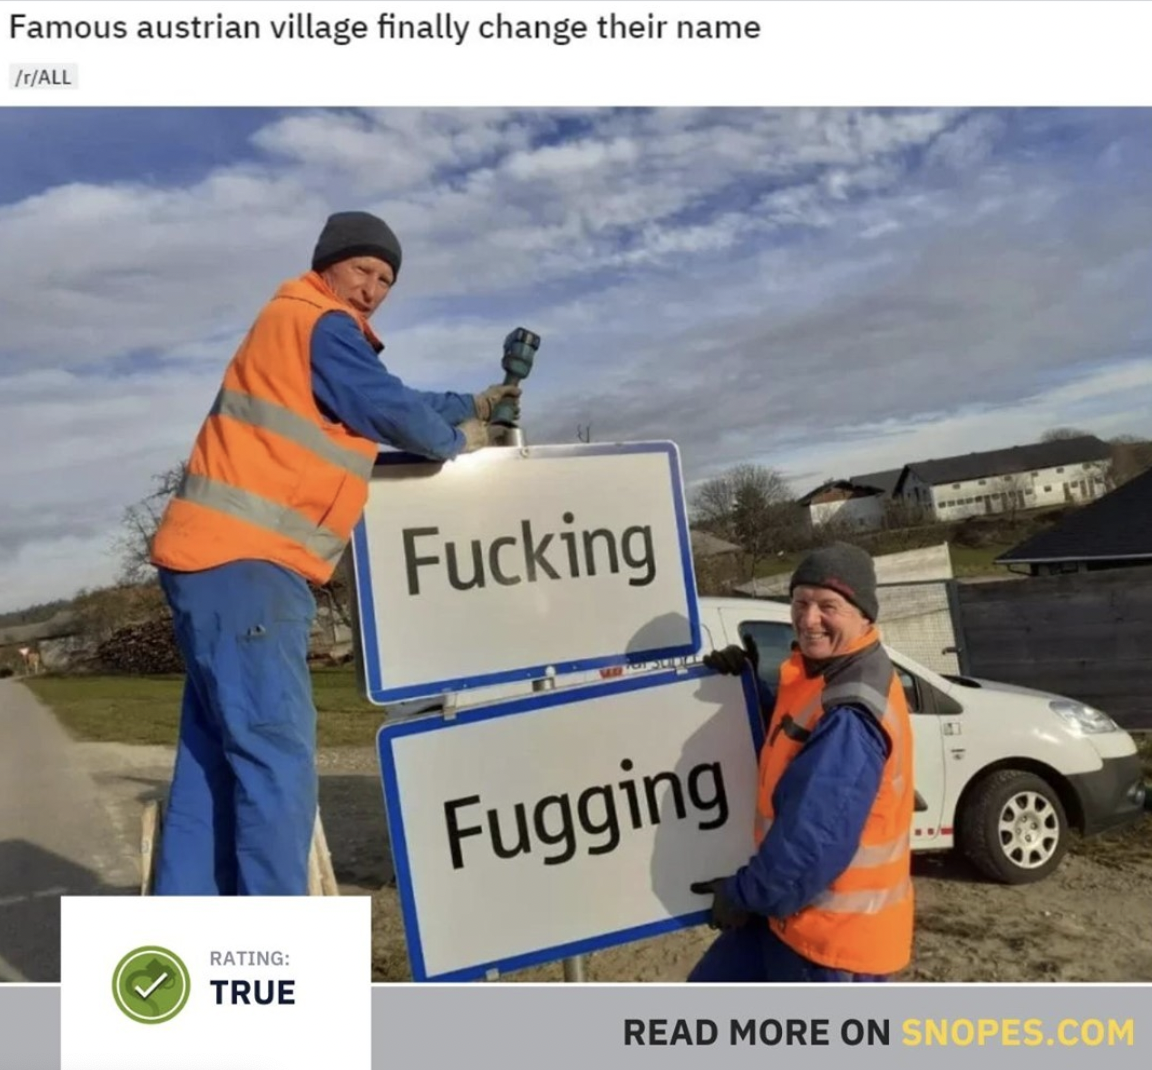 Snopes Facts - name village in austria - Famous austrian village finally change their name ItAll Fucking Fugging Rating True Read More On Snopes.Com